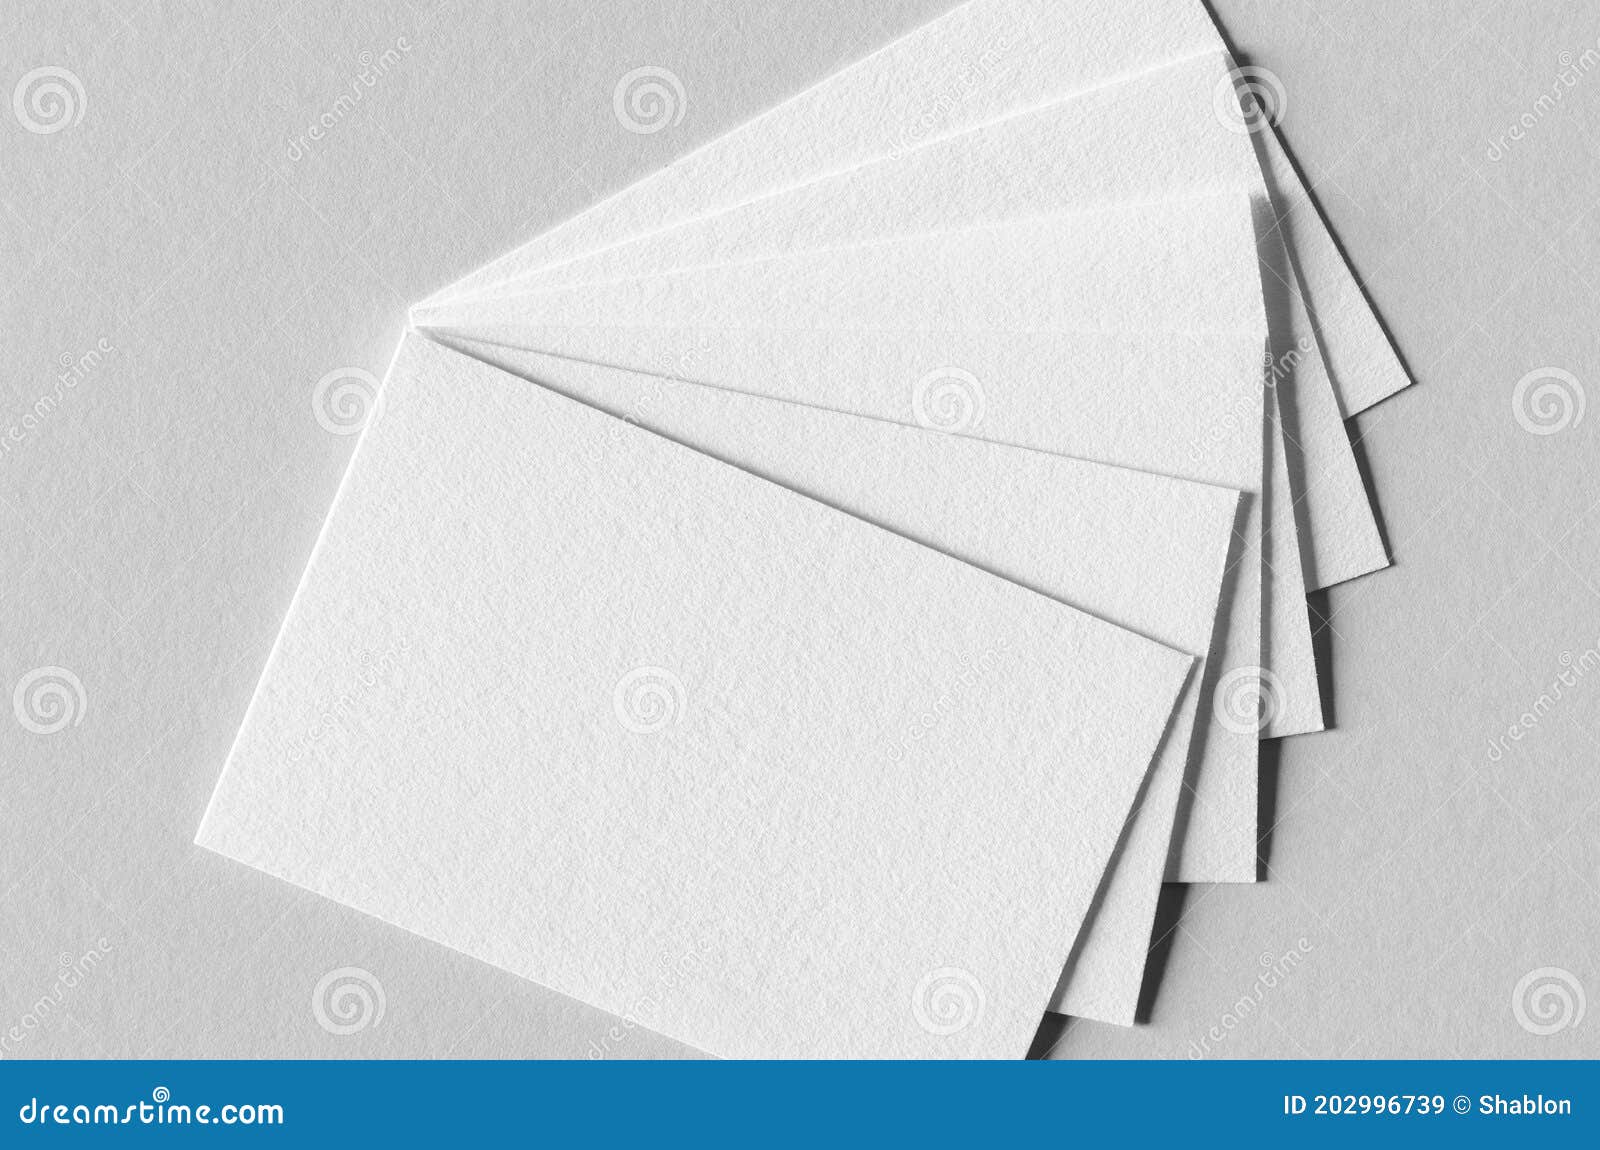 Download Textured Business Card Mockup On A Grey Background 85x55 Mm Stock Image Image Of Branding Multiple 202996739